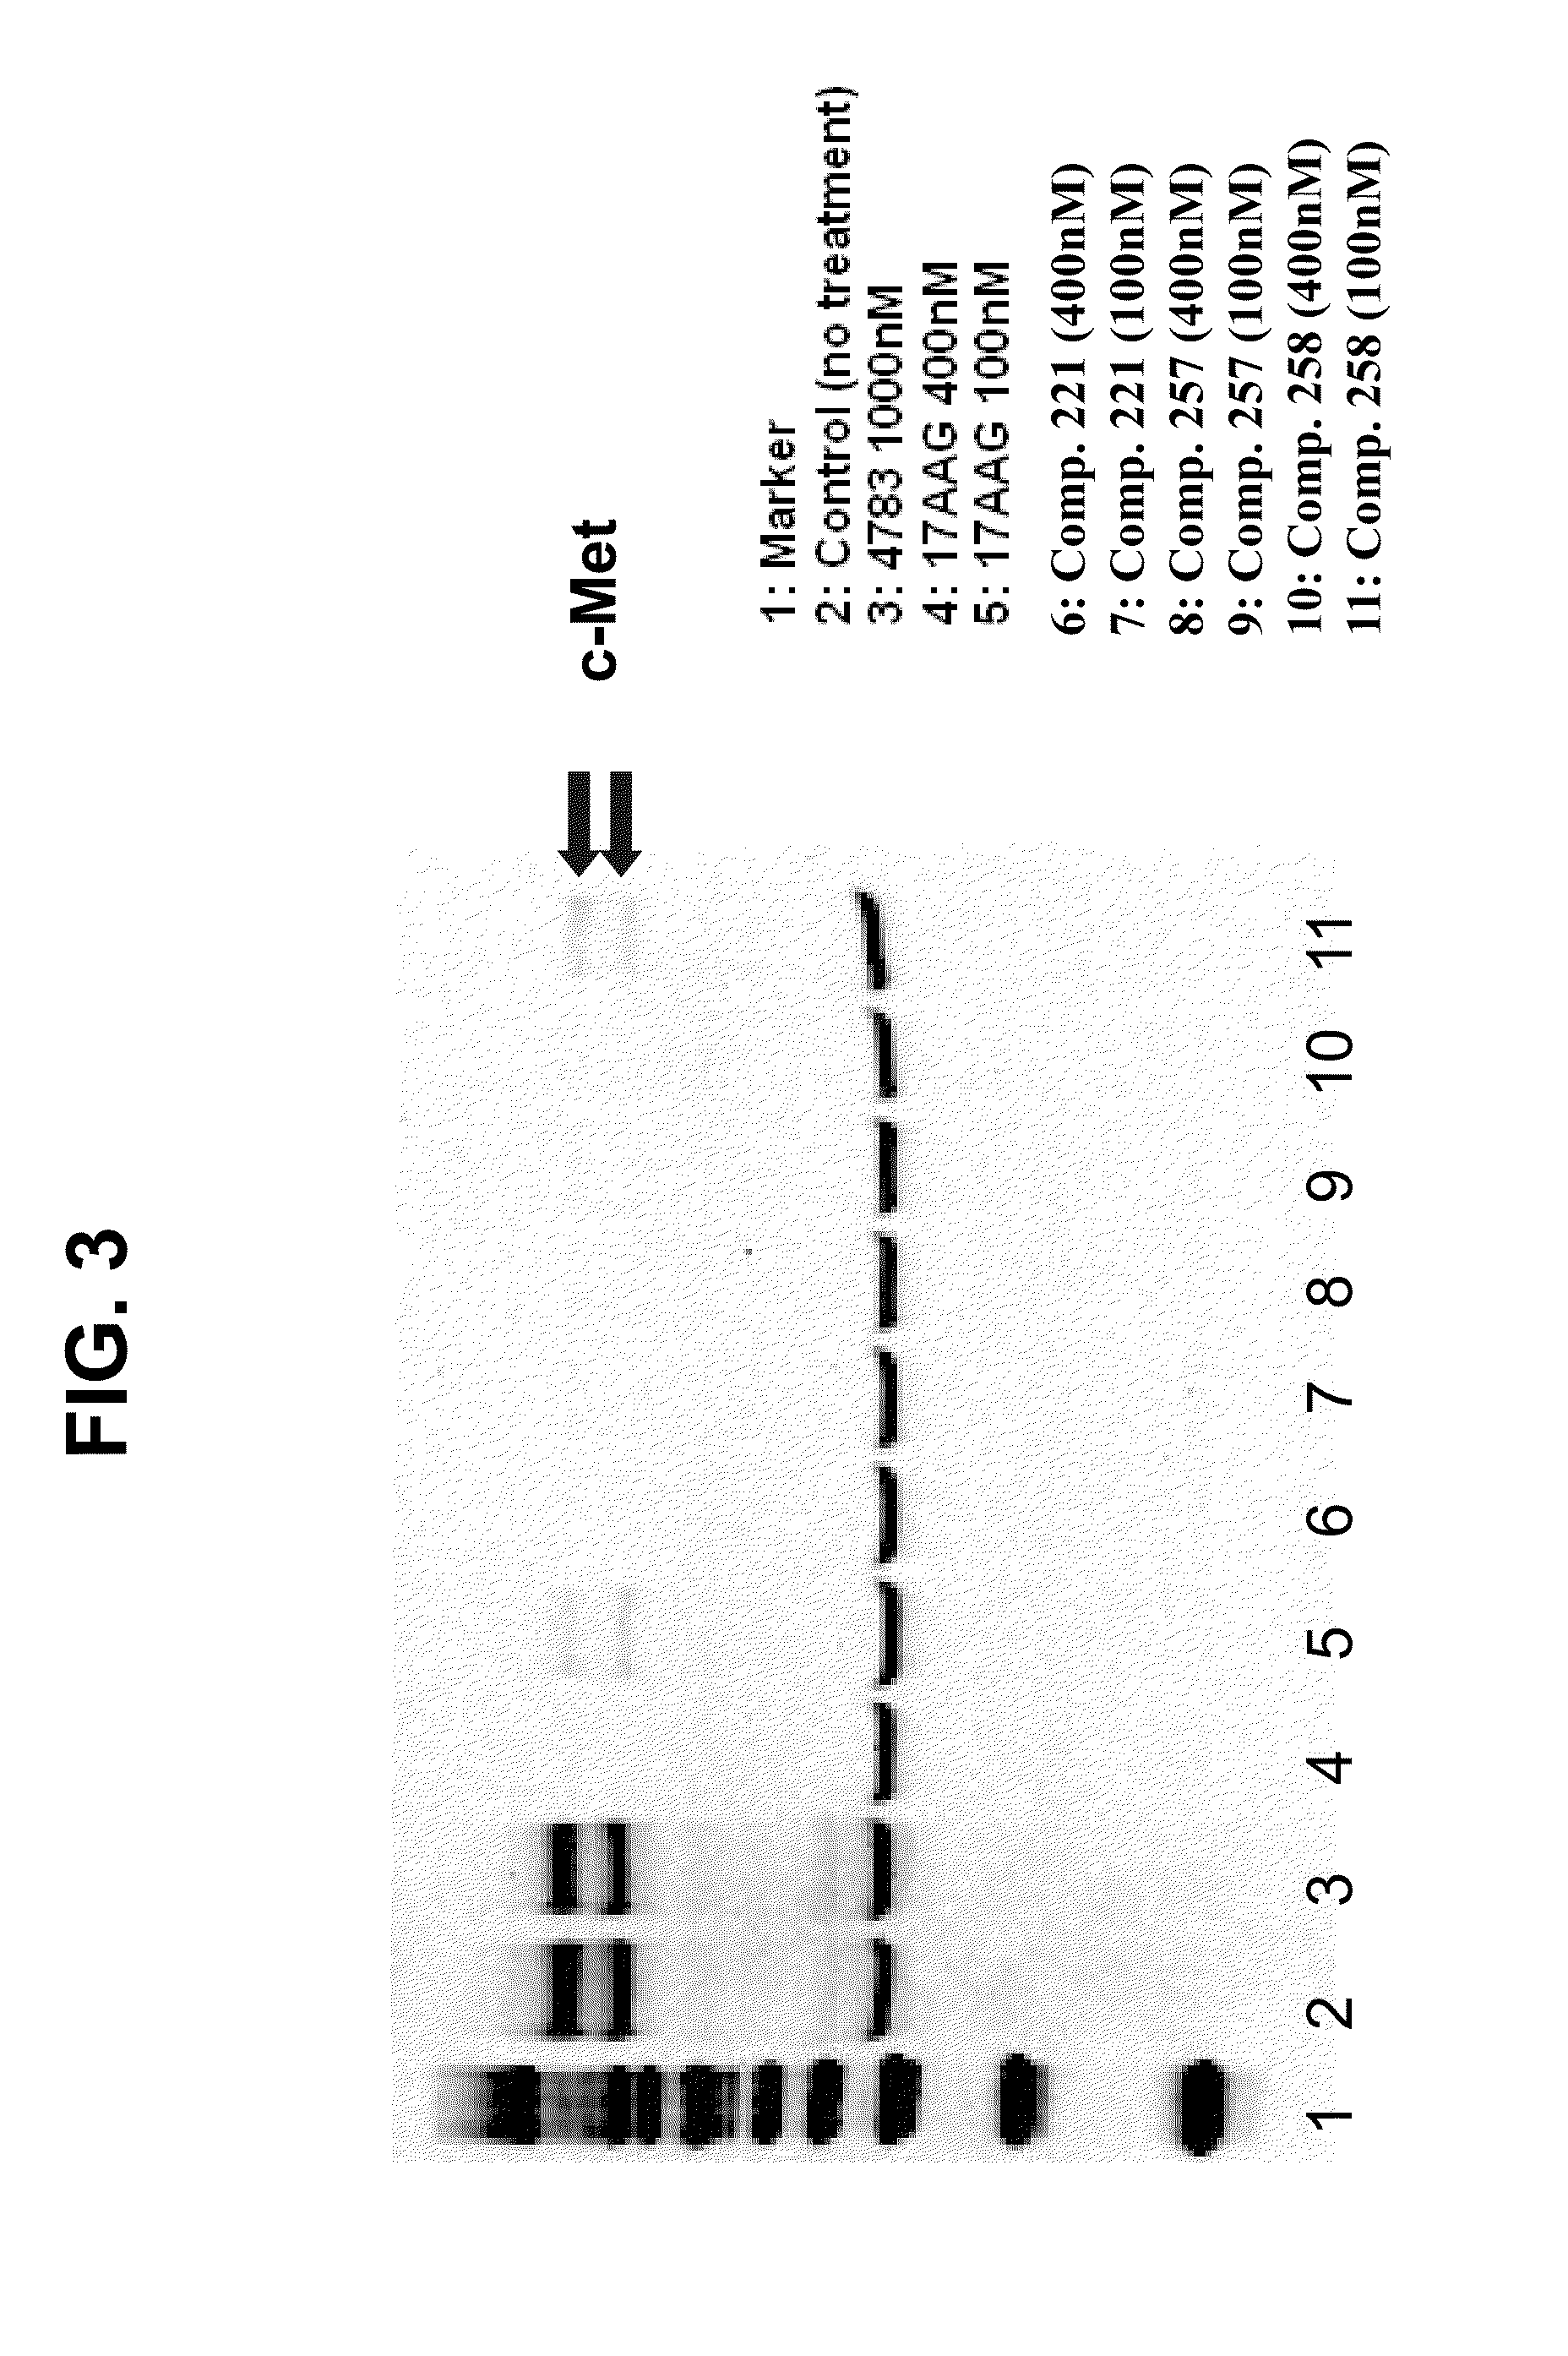 Method for treating proliferative disorders associated with mutations in c-met